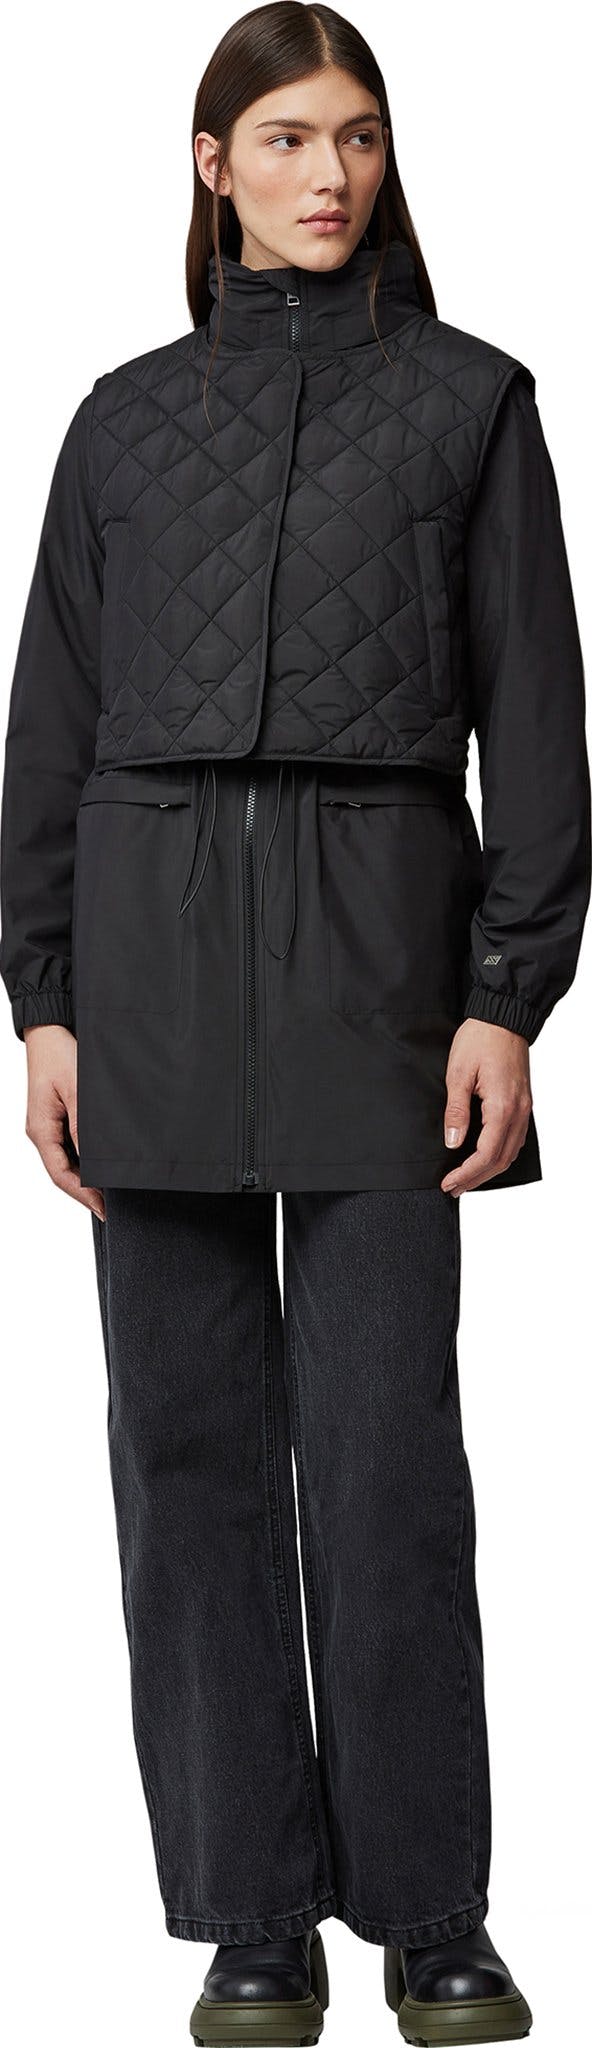 Product image for Edita Mid-Thigh Length Jacket with Hood - Women's